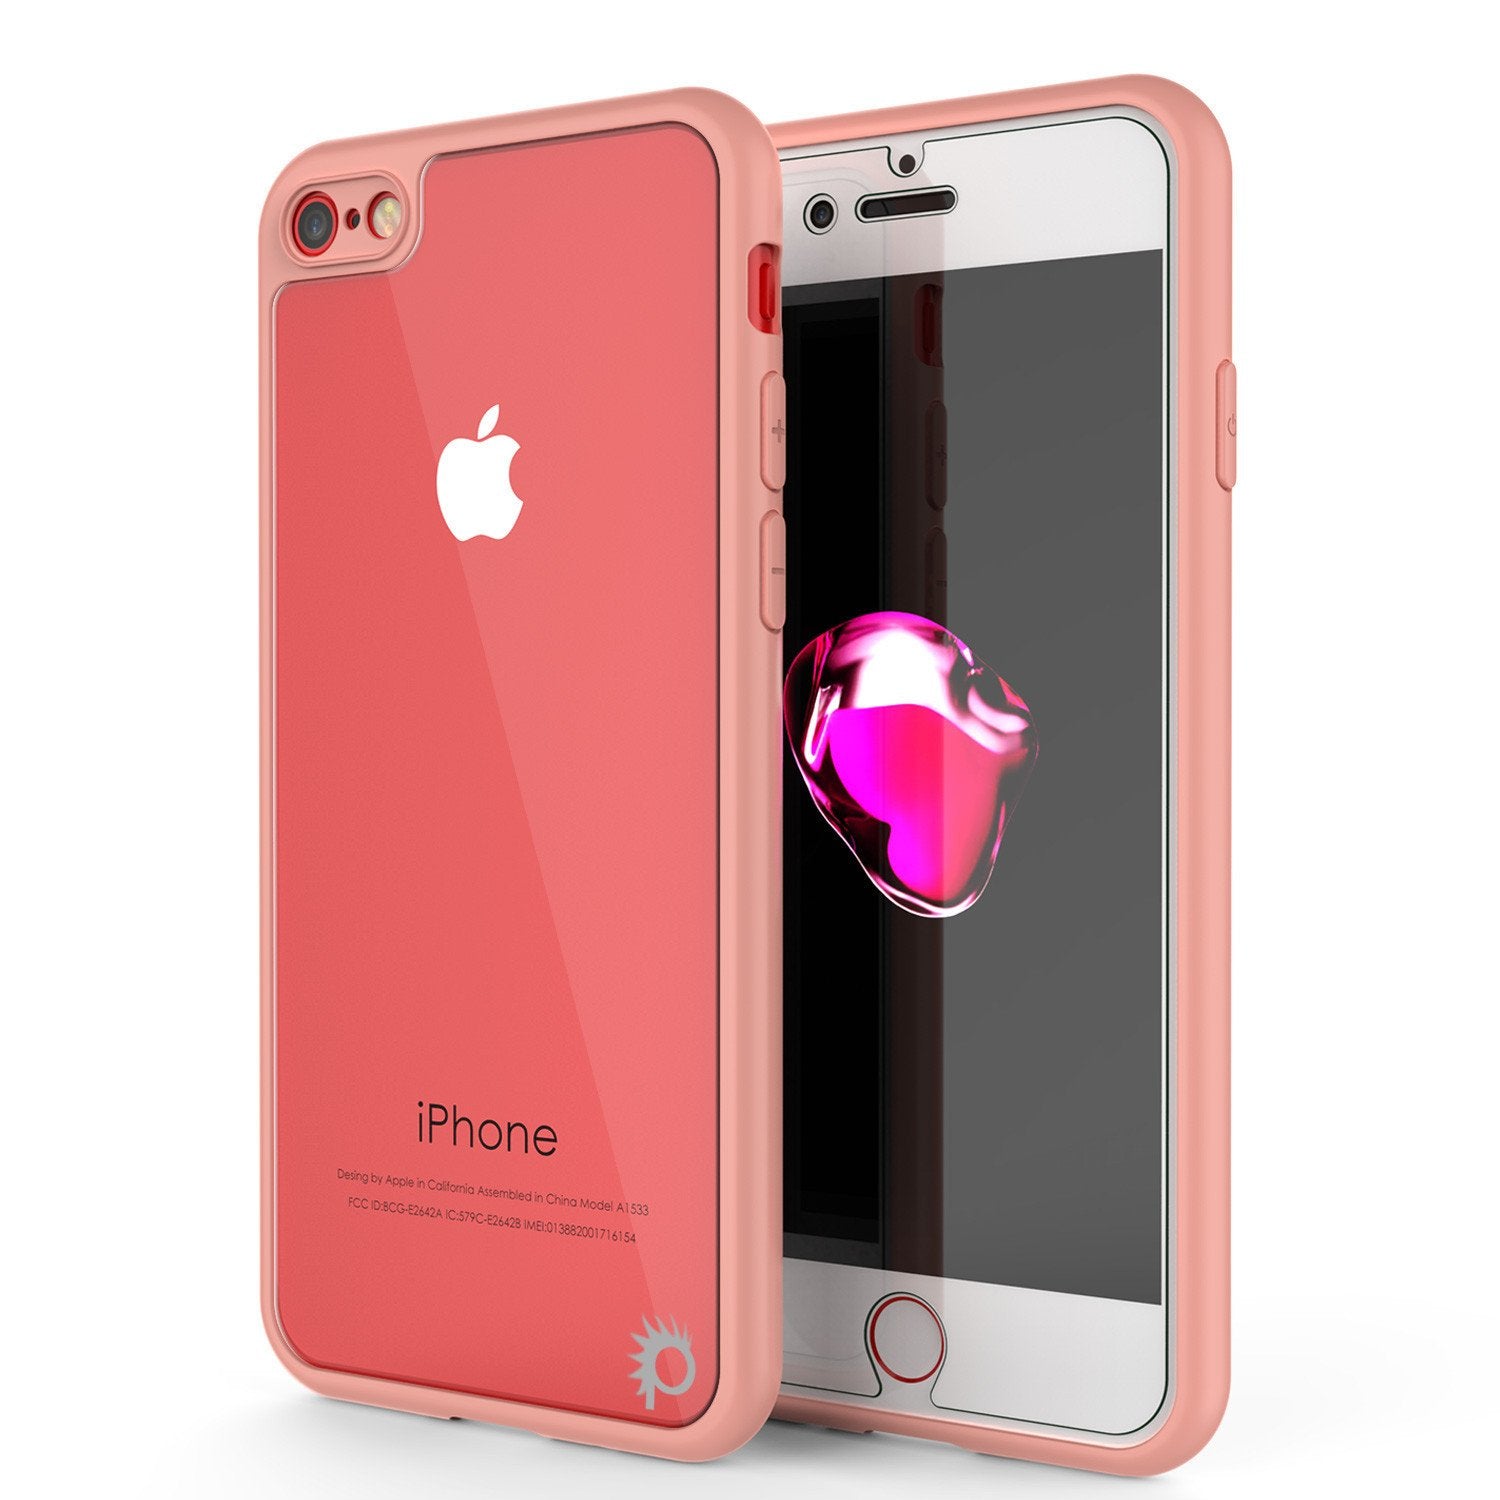 iPhone 7 Case, Punkcase [MASK Series] [PINK] Full Body Hybrid Dual Layer TPU Cover [Clear Back] [Non Slip] [Ultra Thin Fit] W/ protective Tempered Glass Screen Protector for Apple iPhone 7S